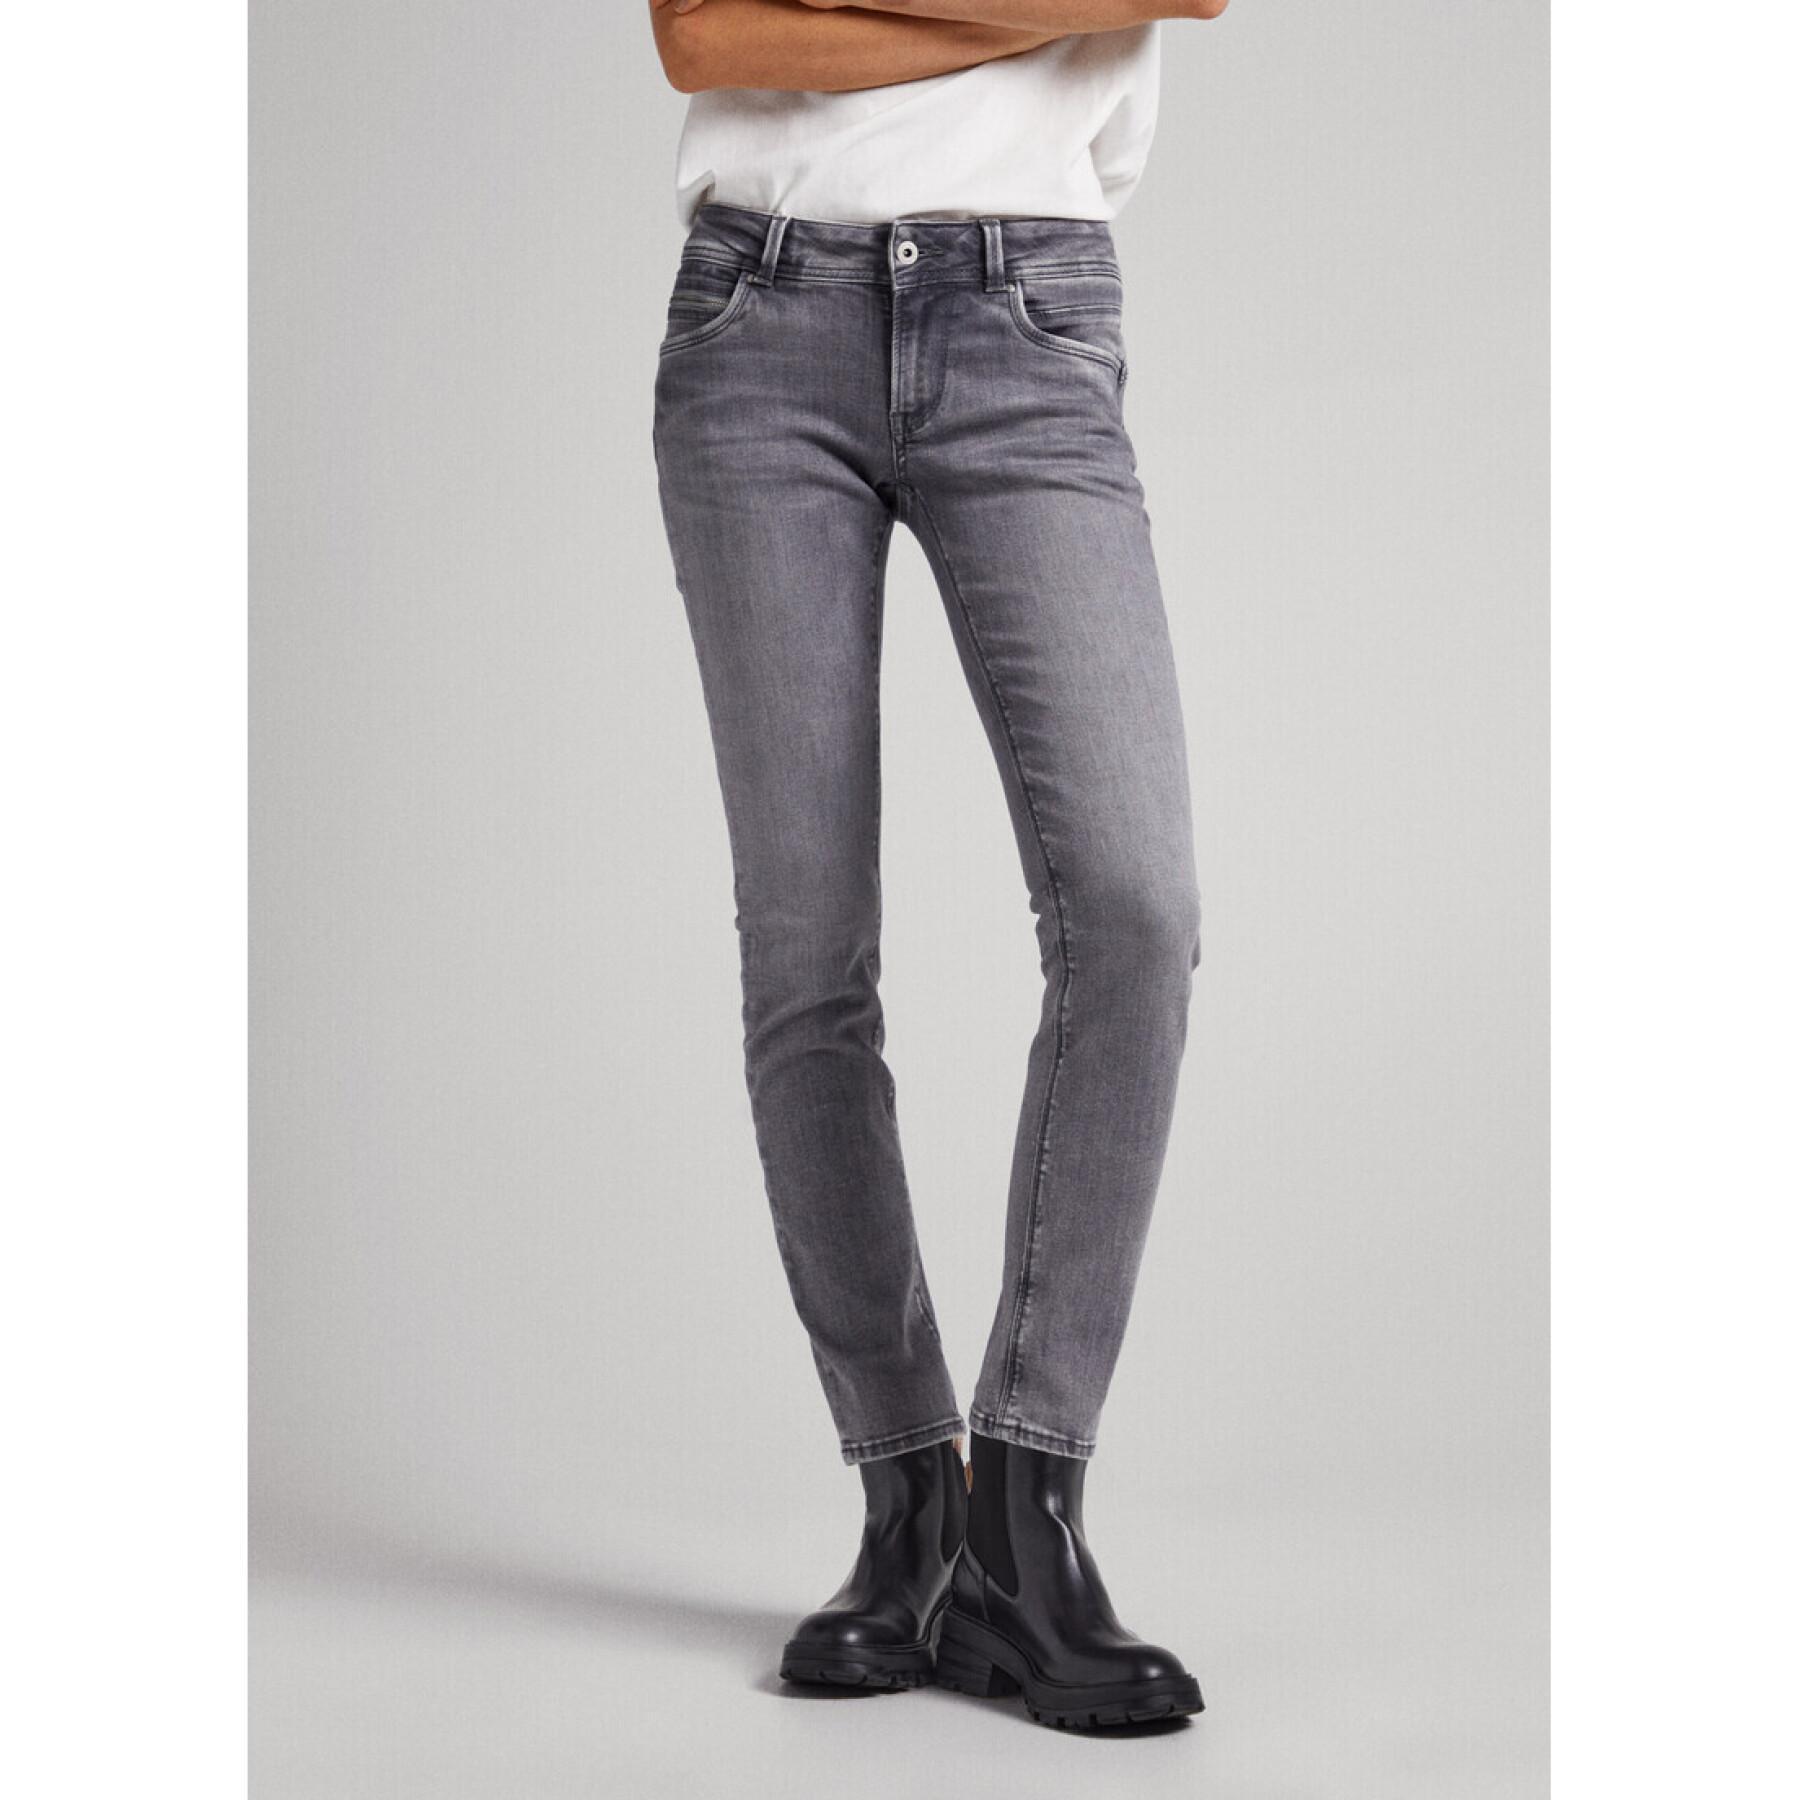 Jeans femme Pepe Jeans New Brooke